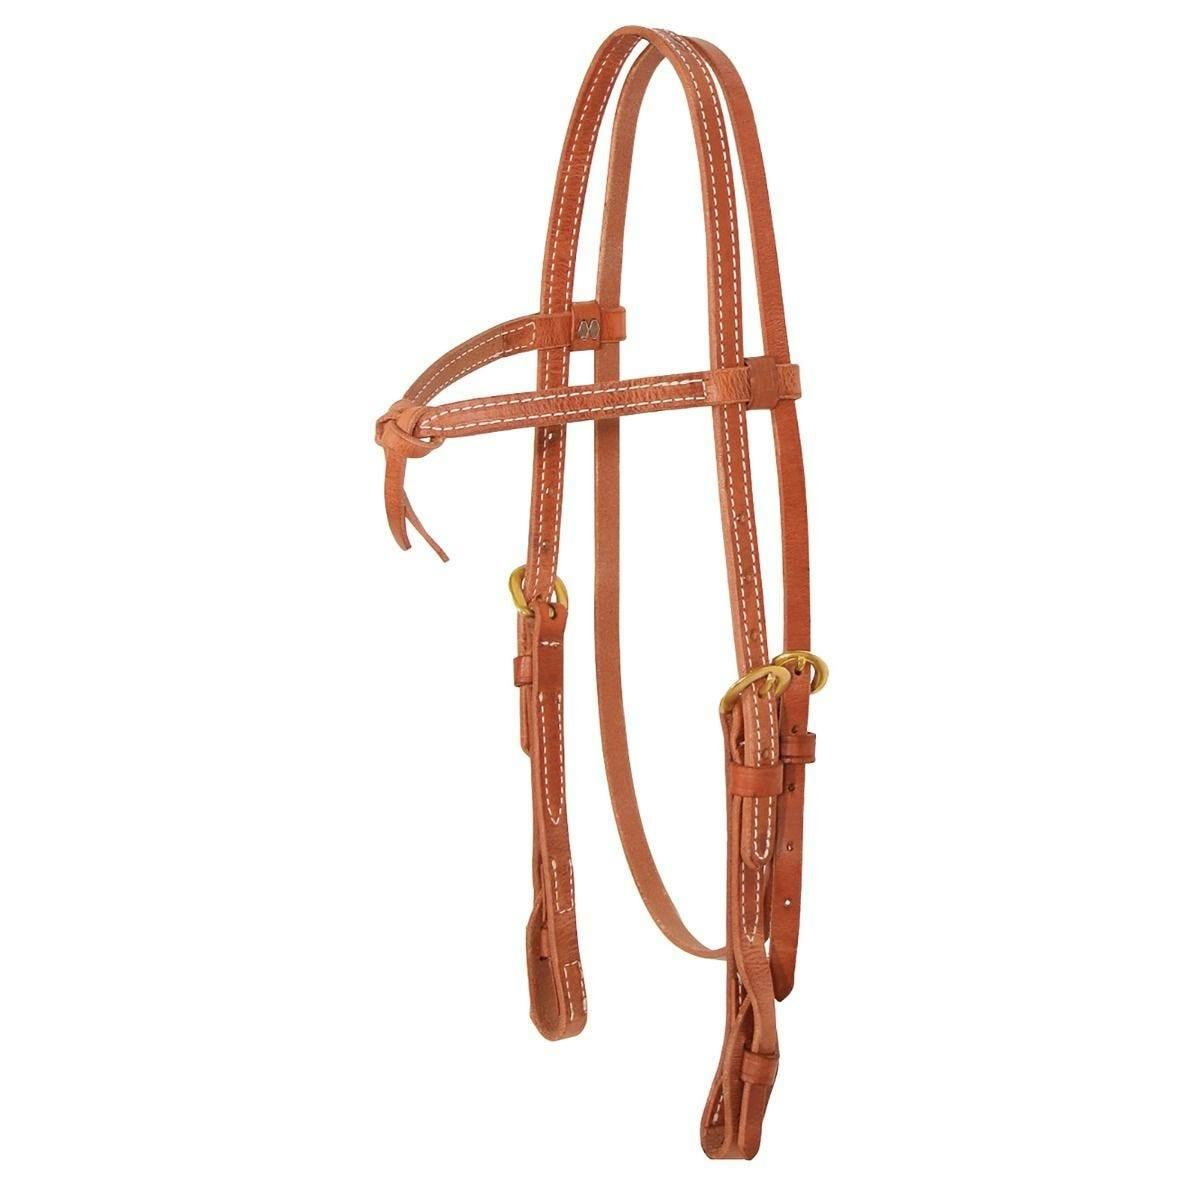 Julie Goodnight Futurity Browband Headstall